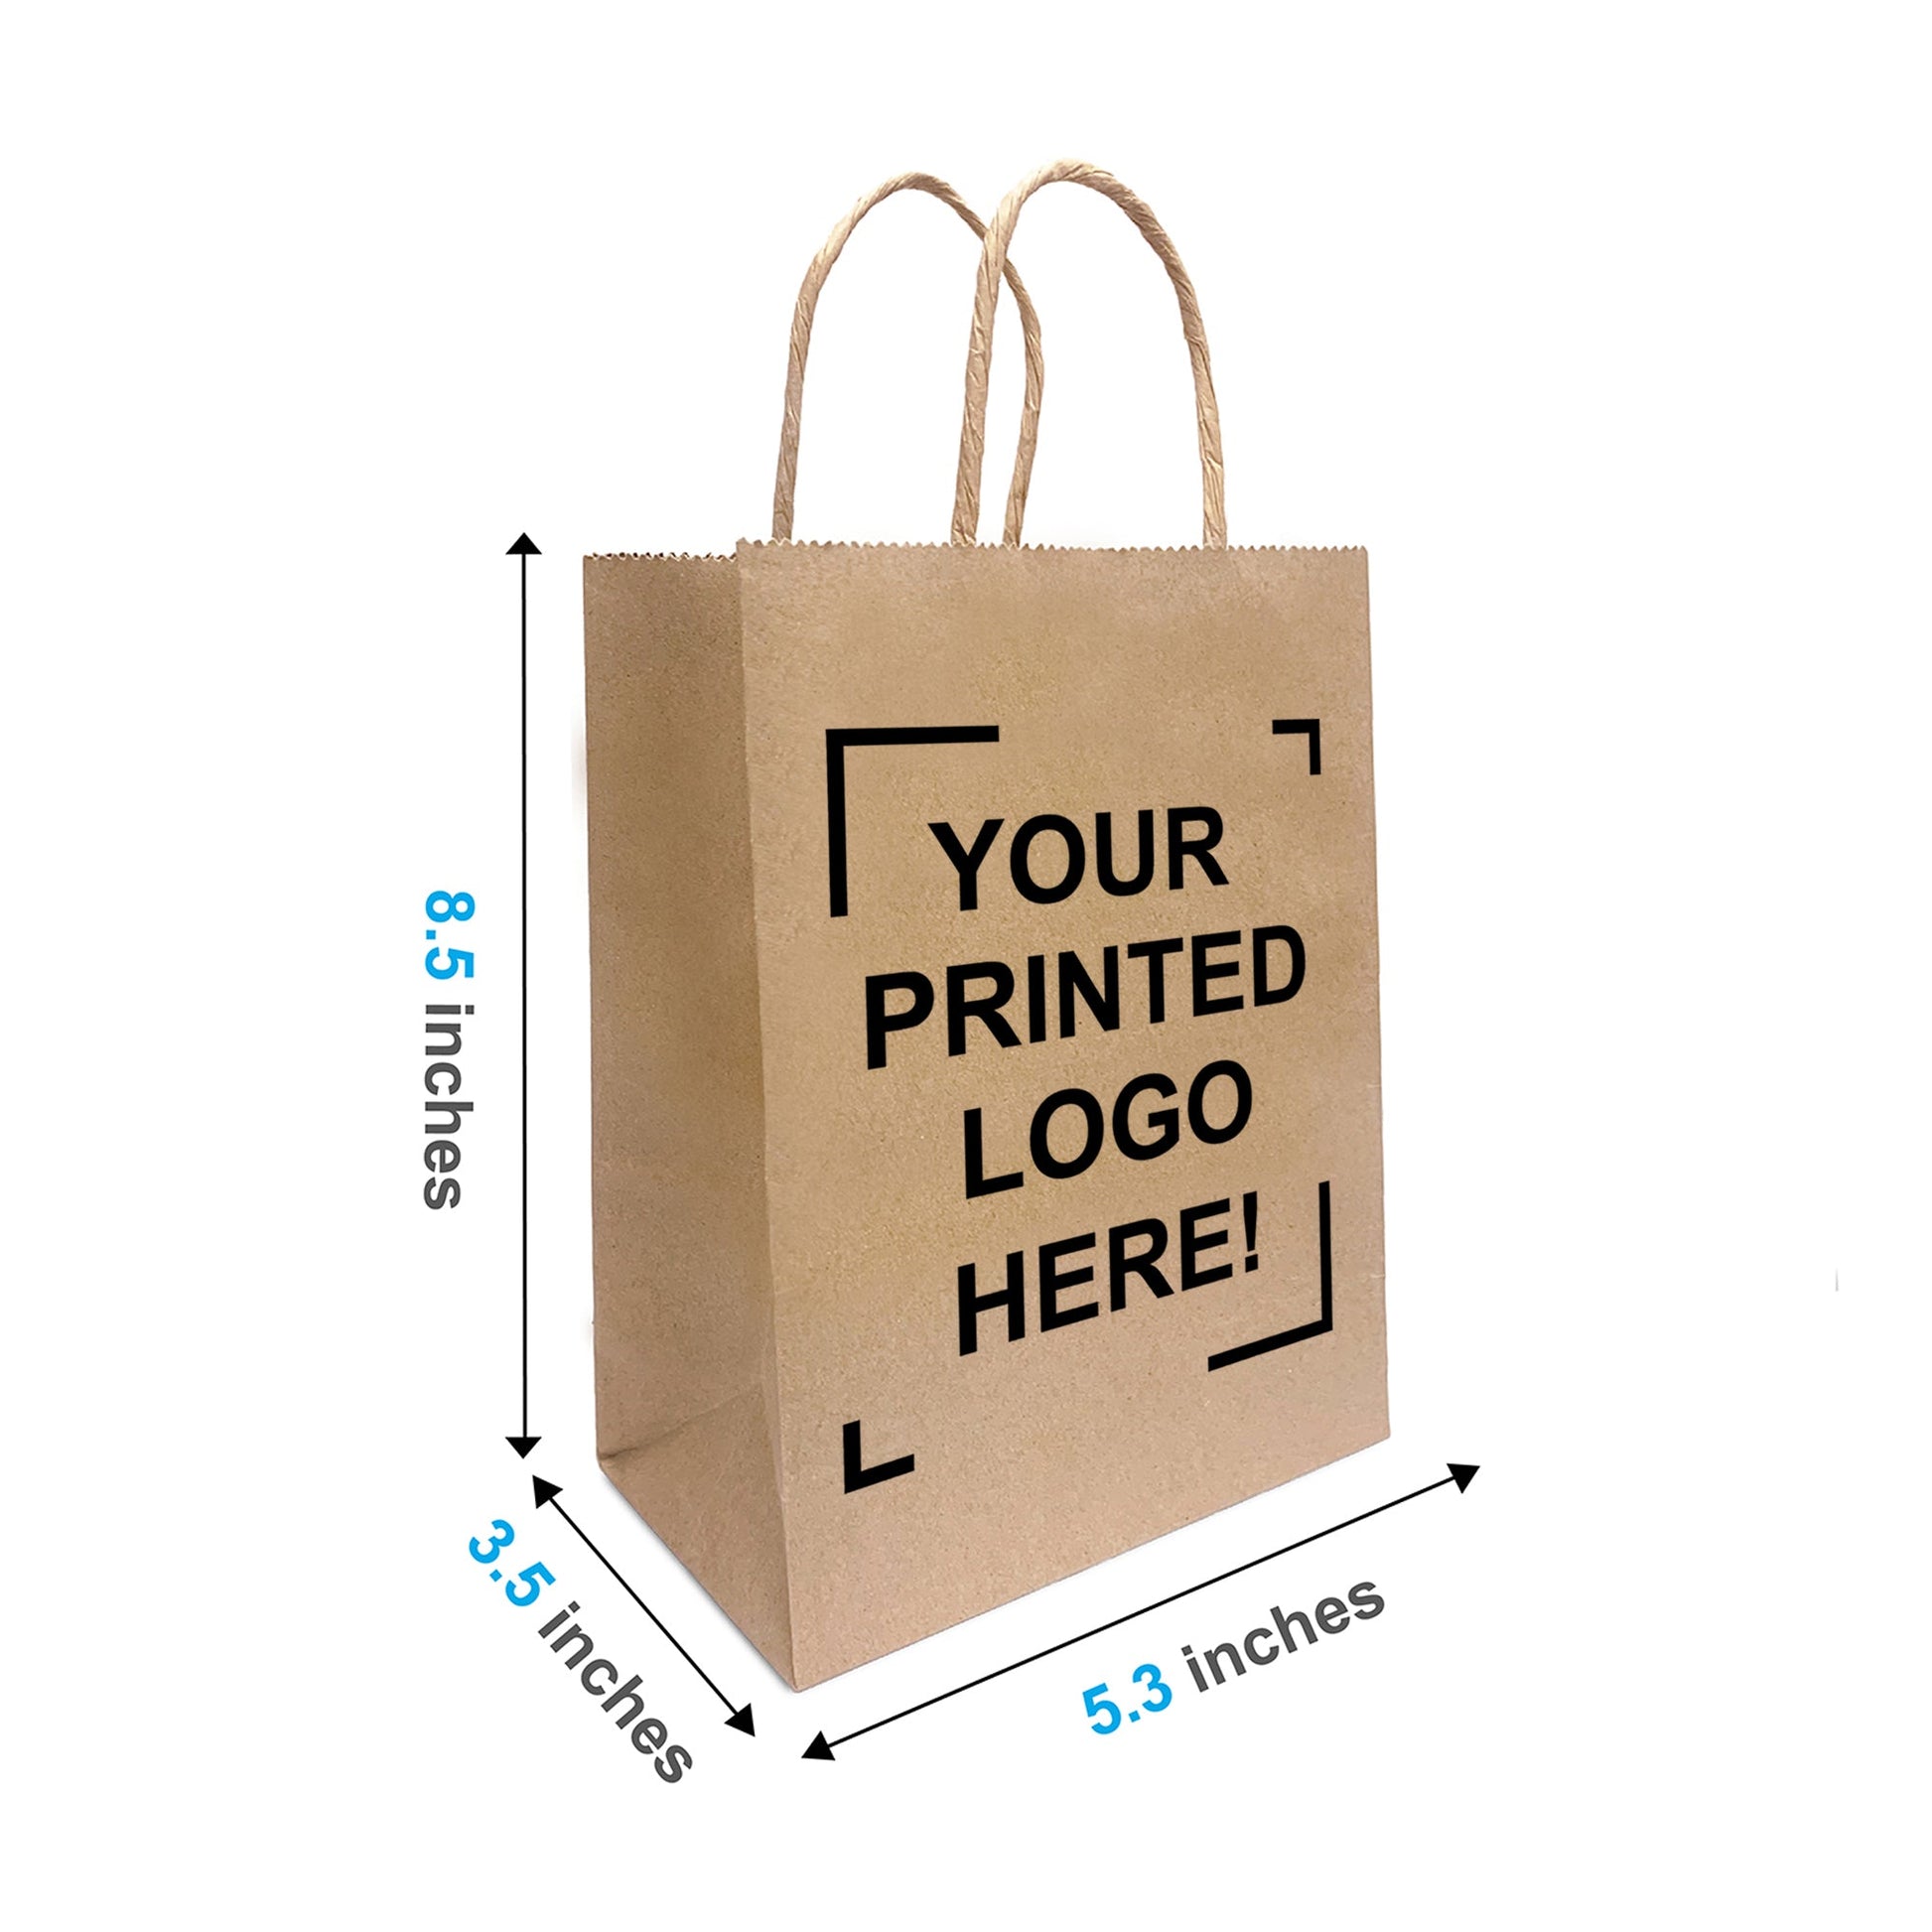 100 Pcs, Gem, 5.3x3.5x8.5 inches, Kraft Paper Bags, with Twisted Handle, Full Color Custom Print